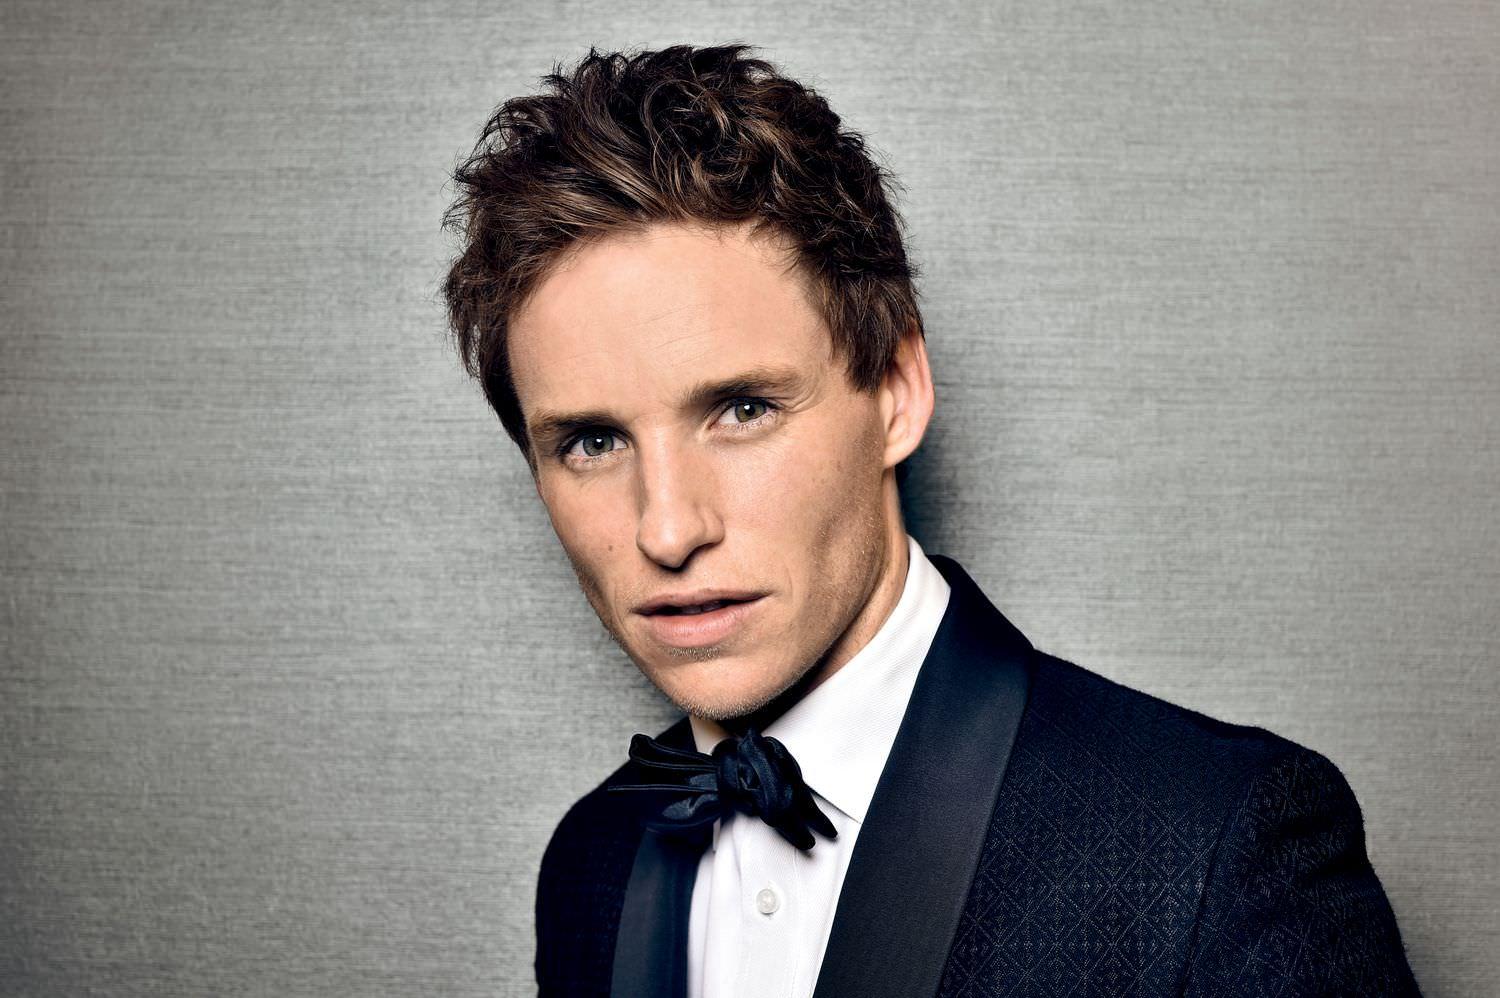 Facts About an English actor, singer and model Eddie Redmayne